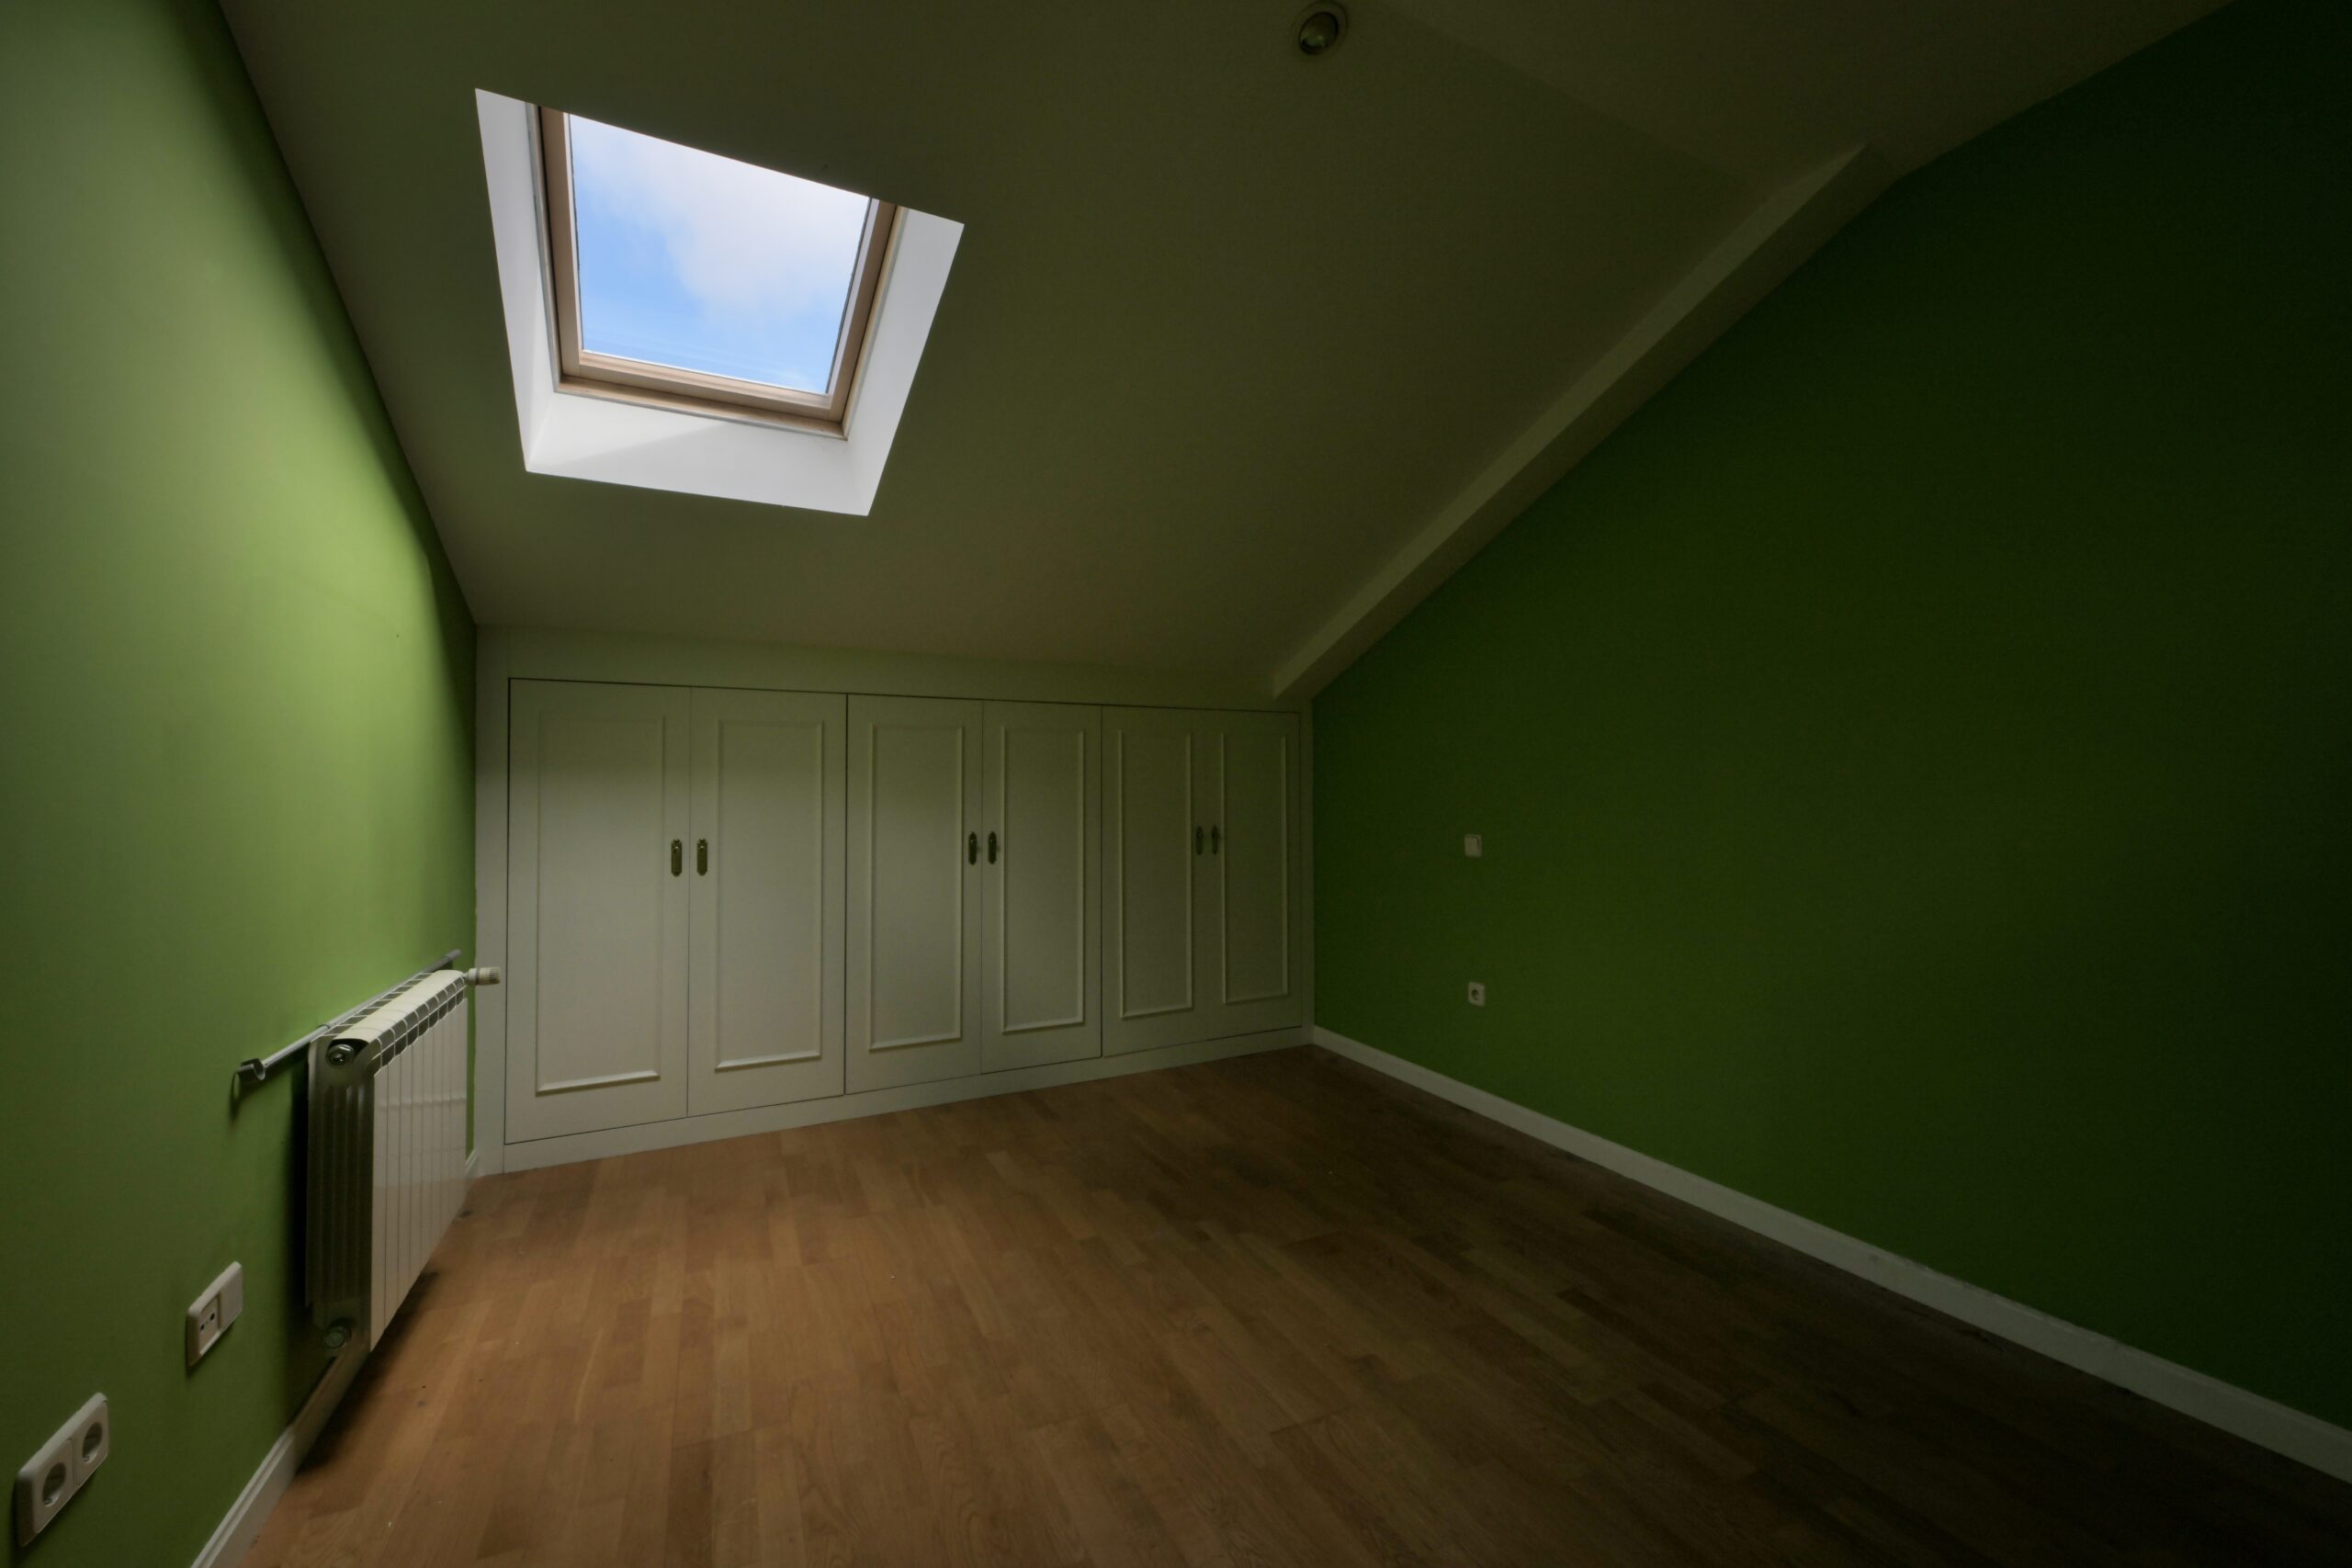 What’s the Difference Between an Ordinary and Walk-On Rooflight?